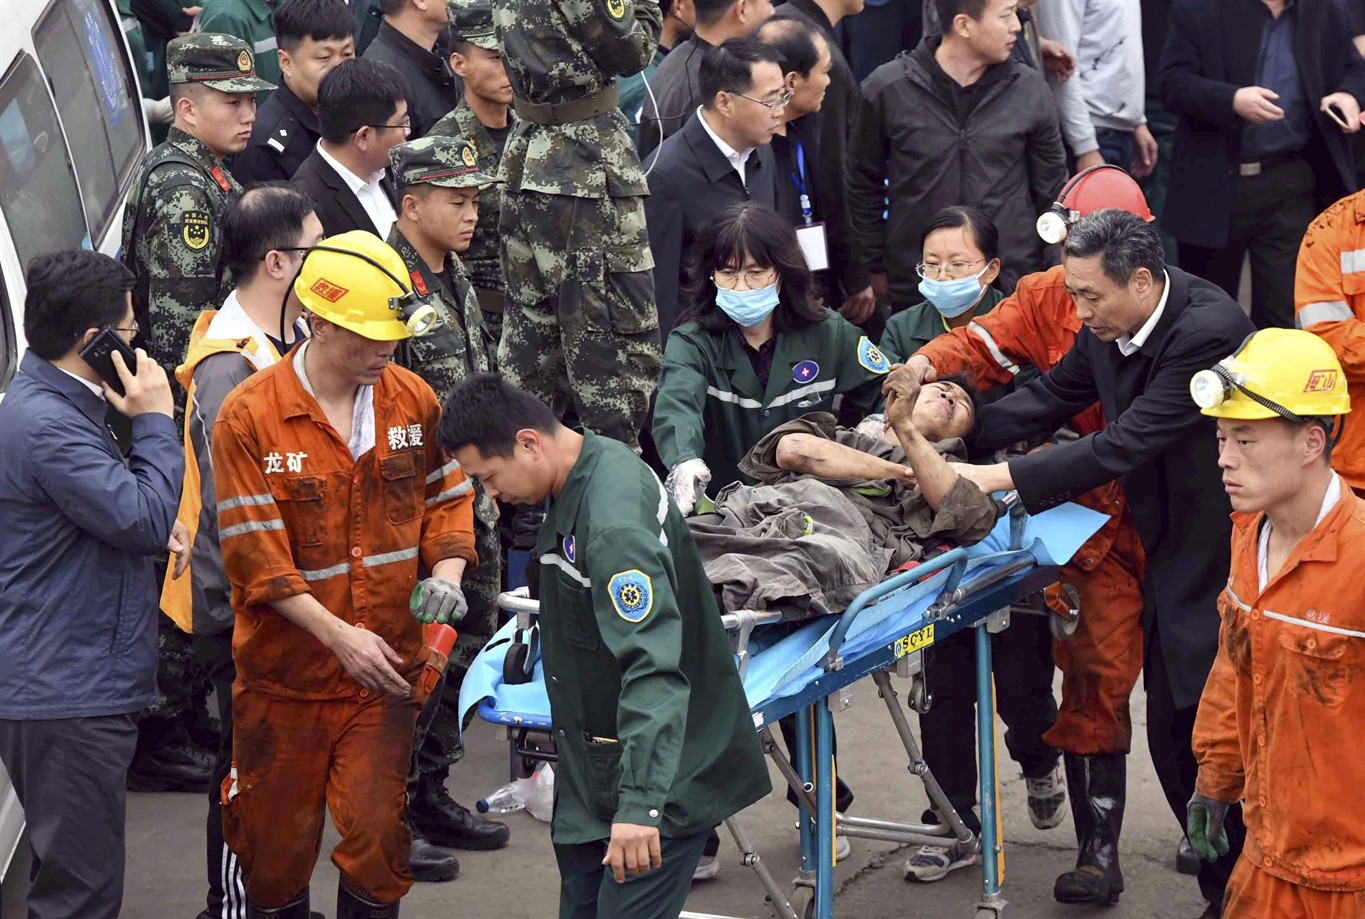 Death toll in China mining accident rises to 21